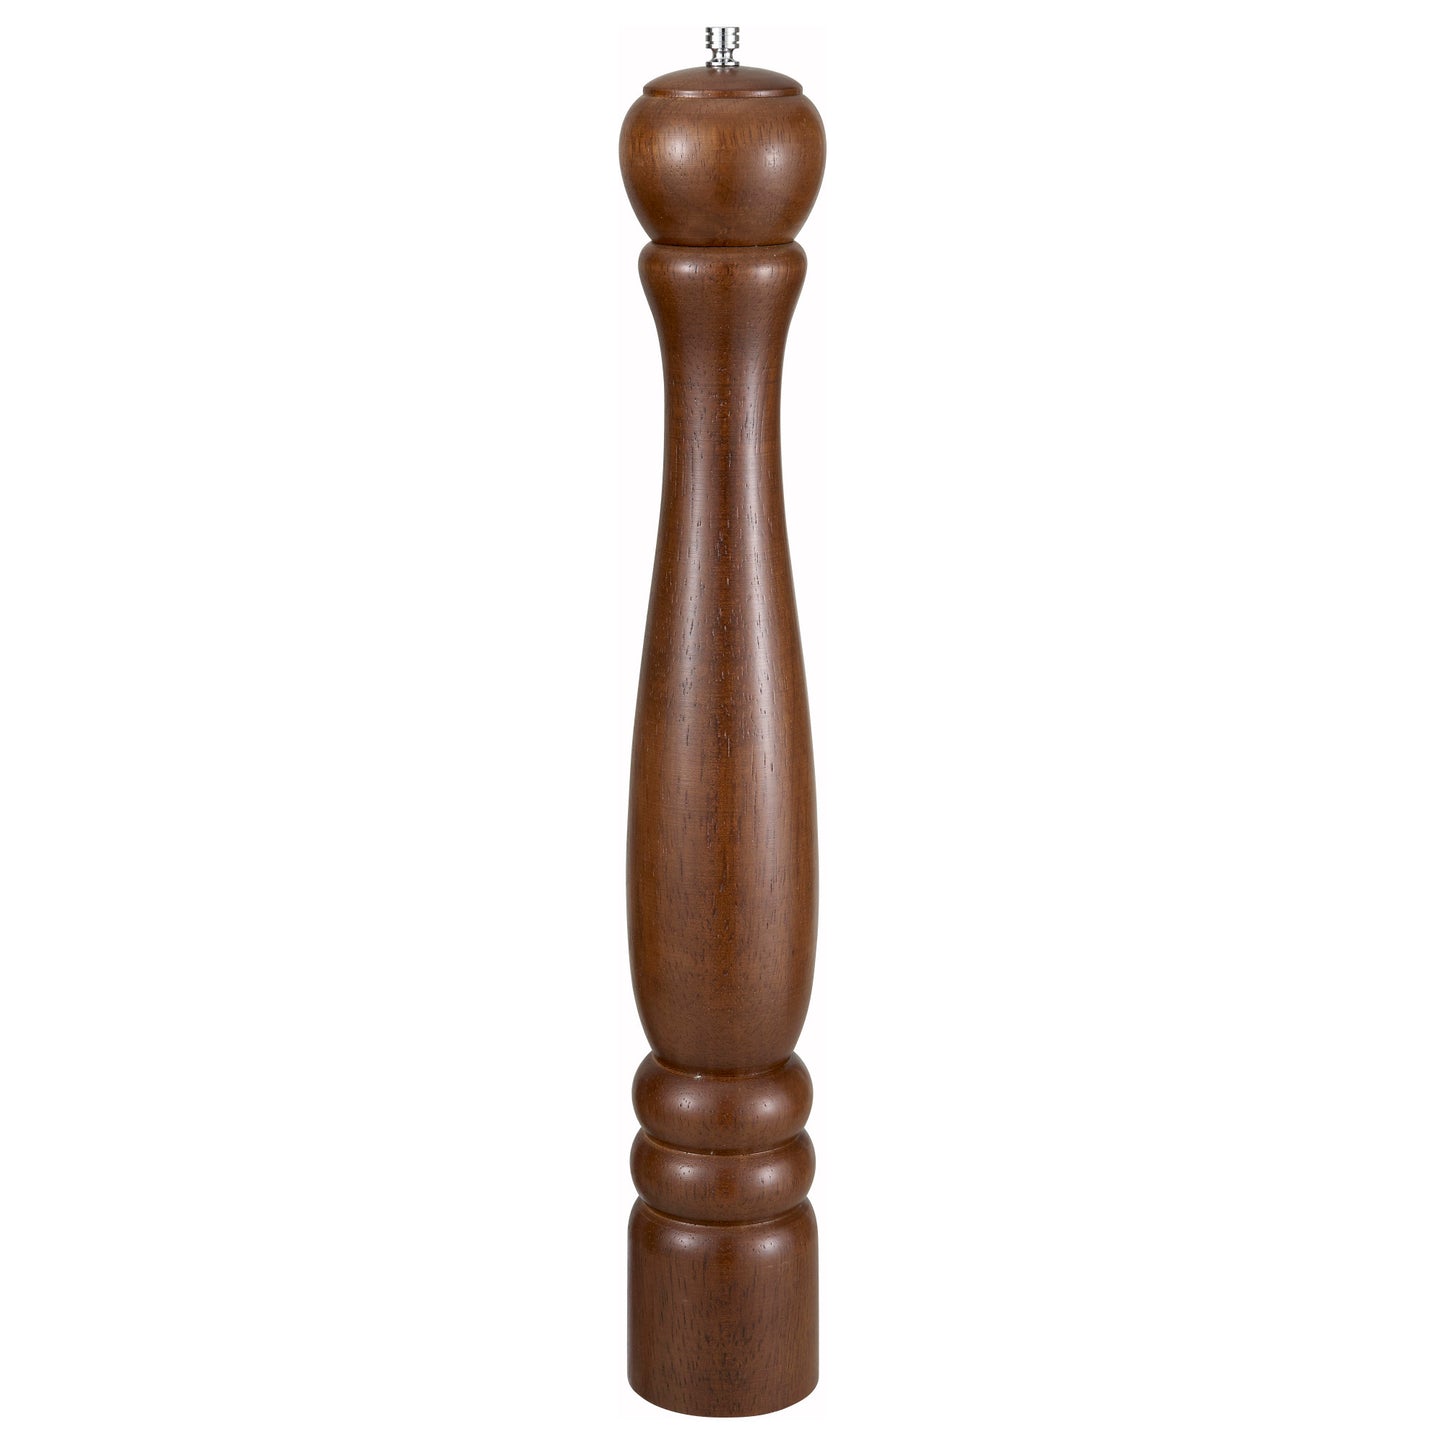 WPM-18 - 18" Peppermill, Russet Brown Wood